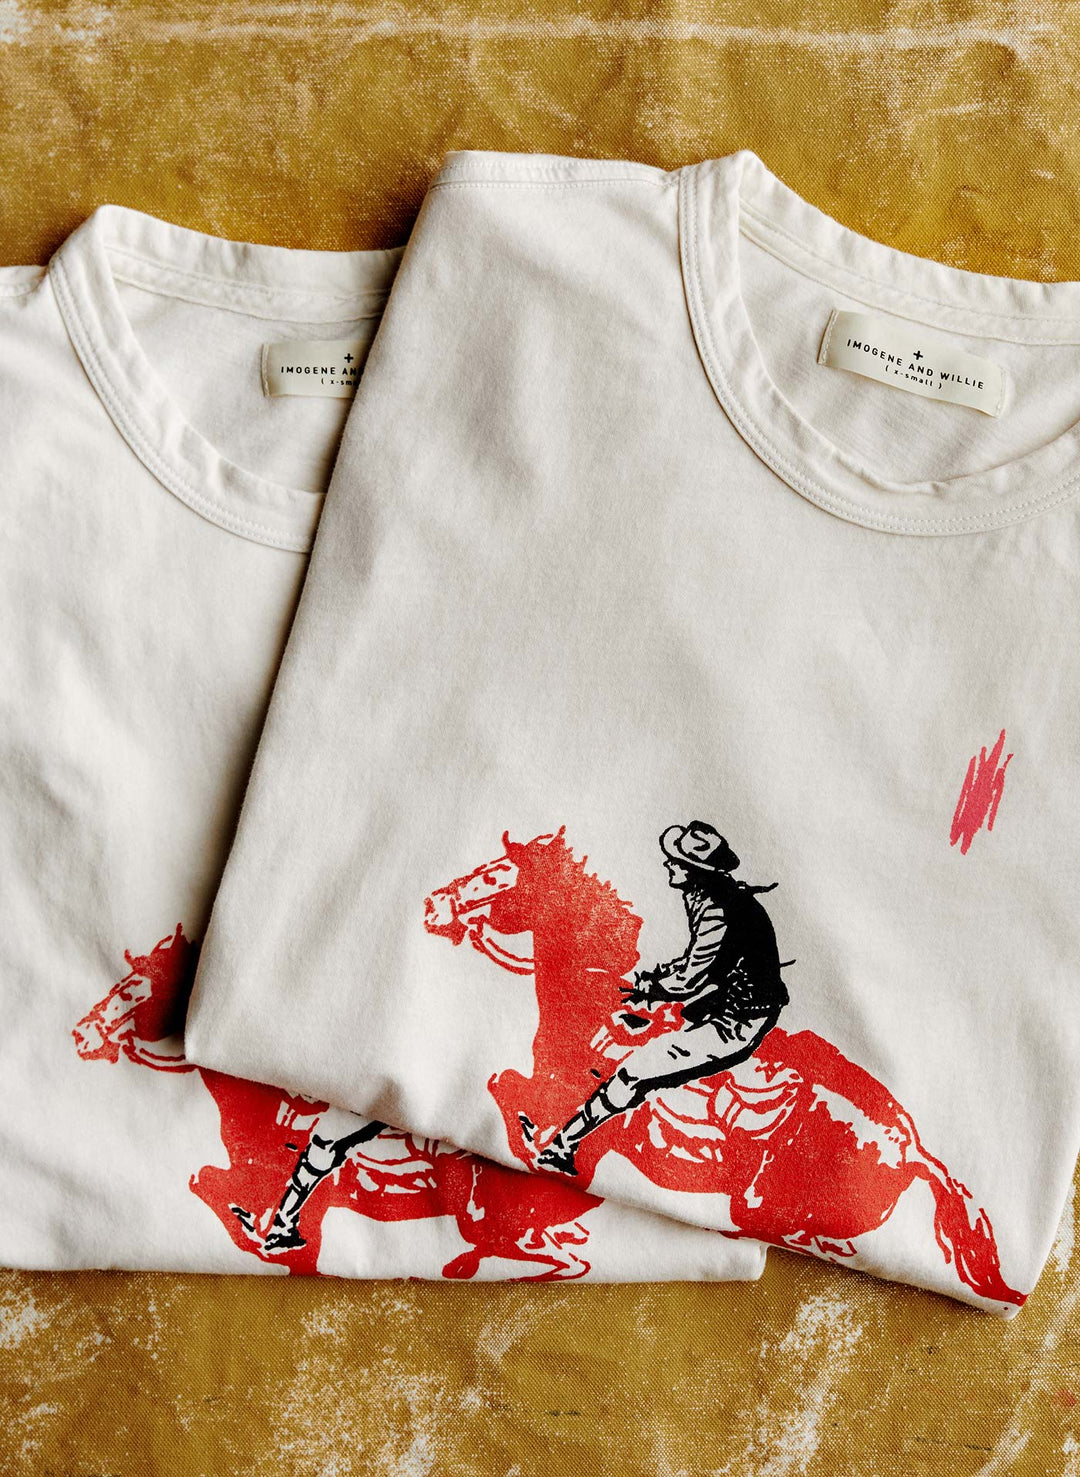 a white t-shirt with a horse design on it